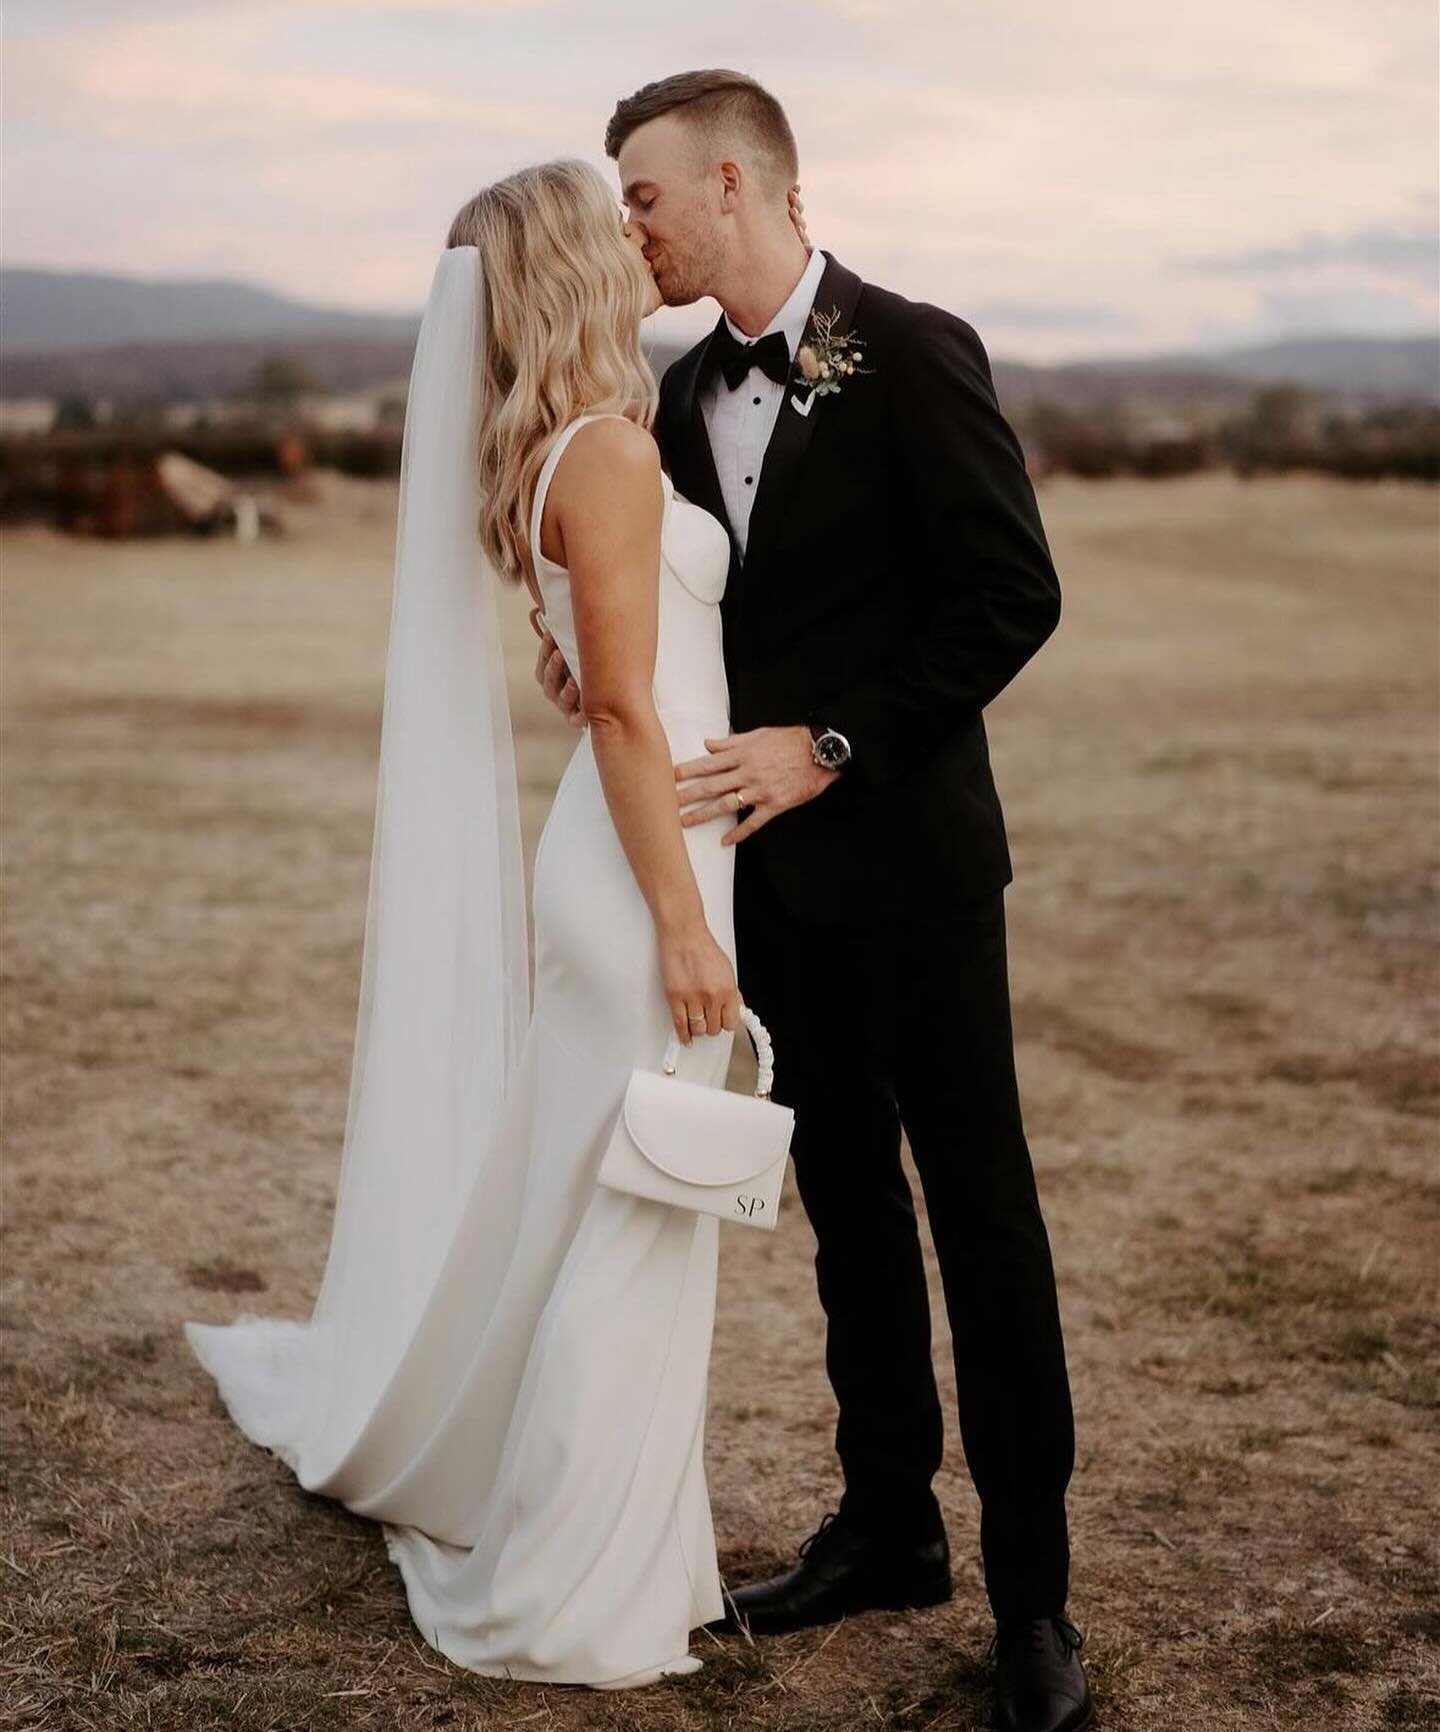 SPHERE BRIDE &mdash;&mdash; Sultry romance with @chosenbykyha Vincent gown for bride @staceyking_&rsquo;s Farm set wedding.

To try on and explore our full Chosen By Kyha collection in our Queensland gallery, book an appointment via the link in our b